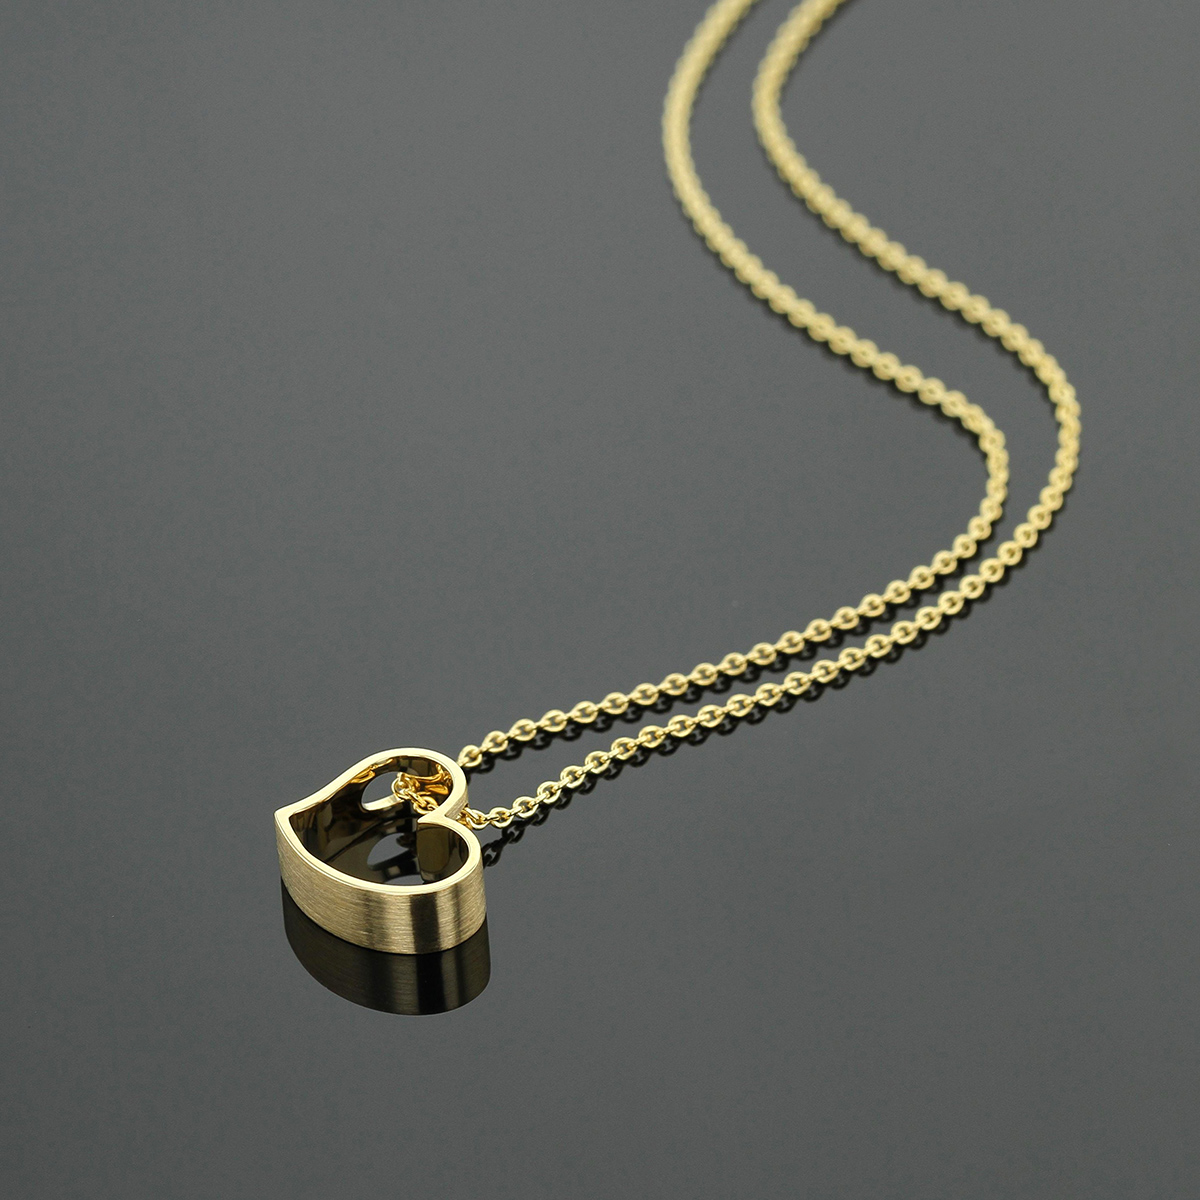 Heart shaped pendant in 18ct yellow gold